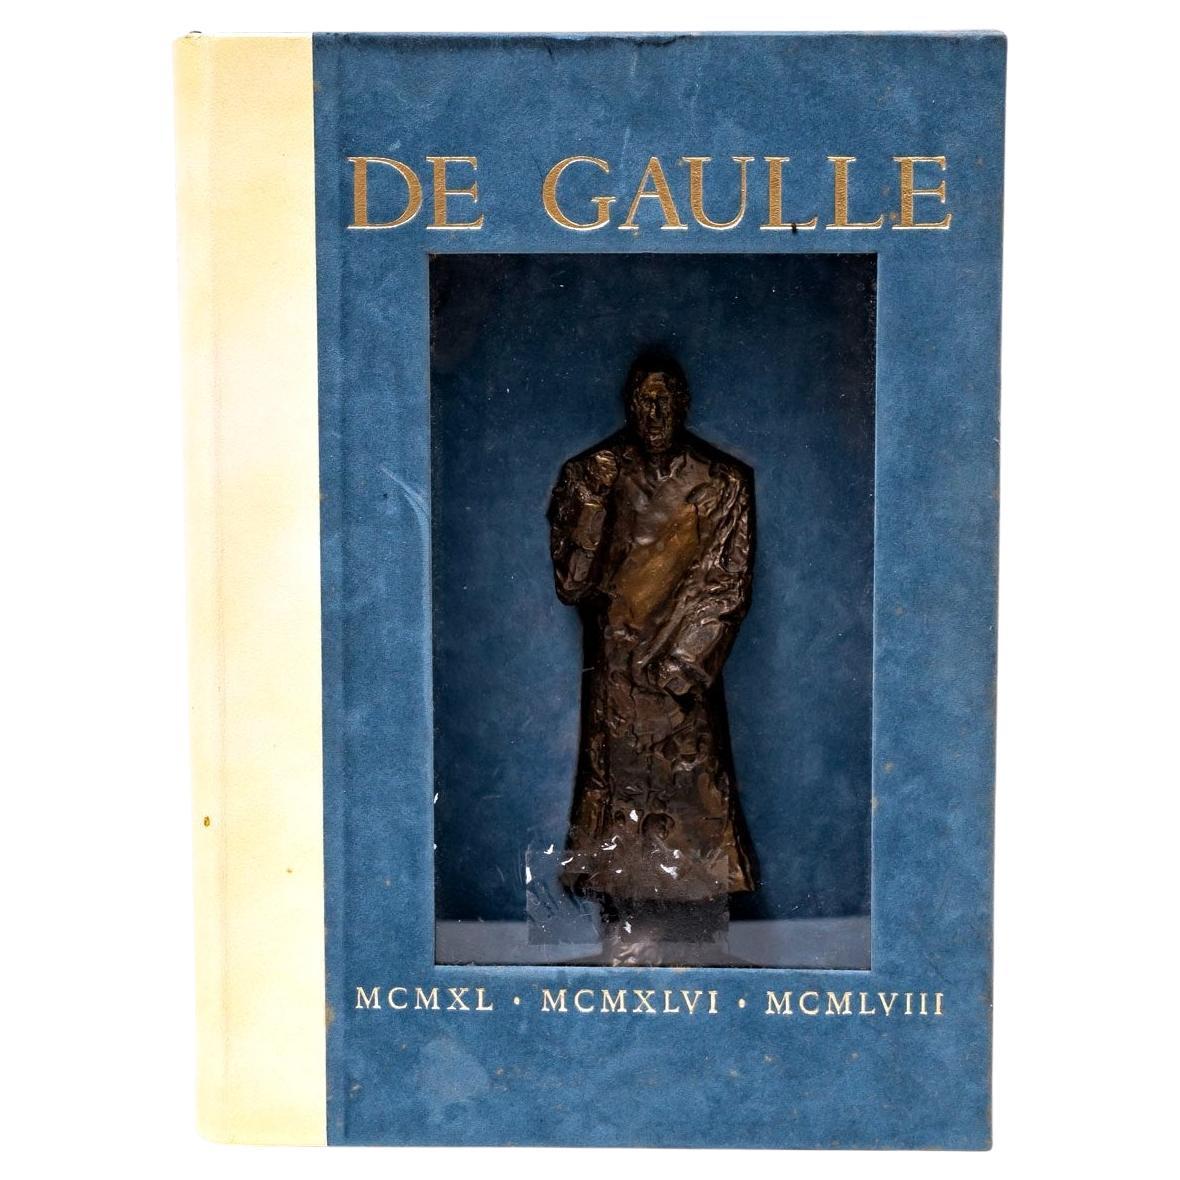 Box In Tribute To Charles De Gaulle - Lost Wax Bronze And Original Lithographs